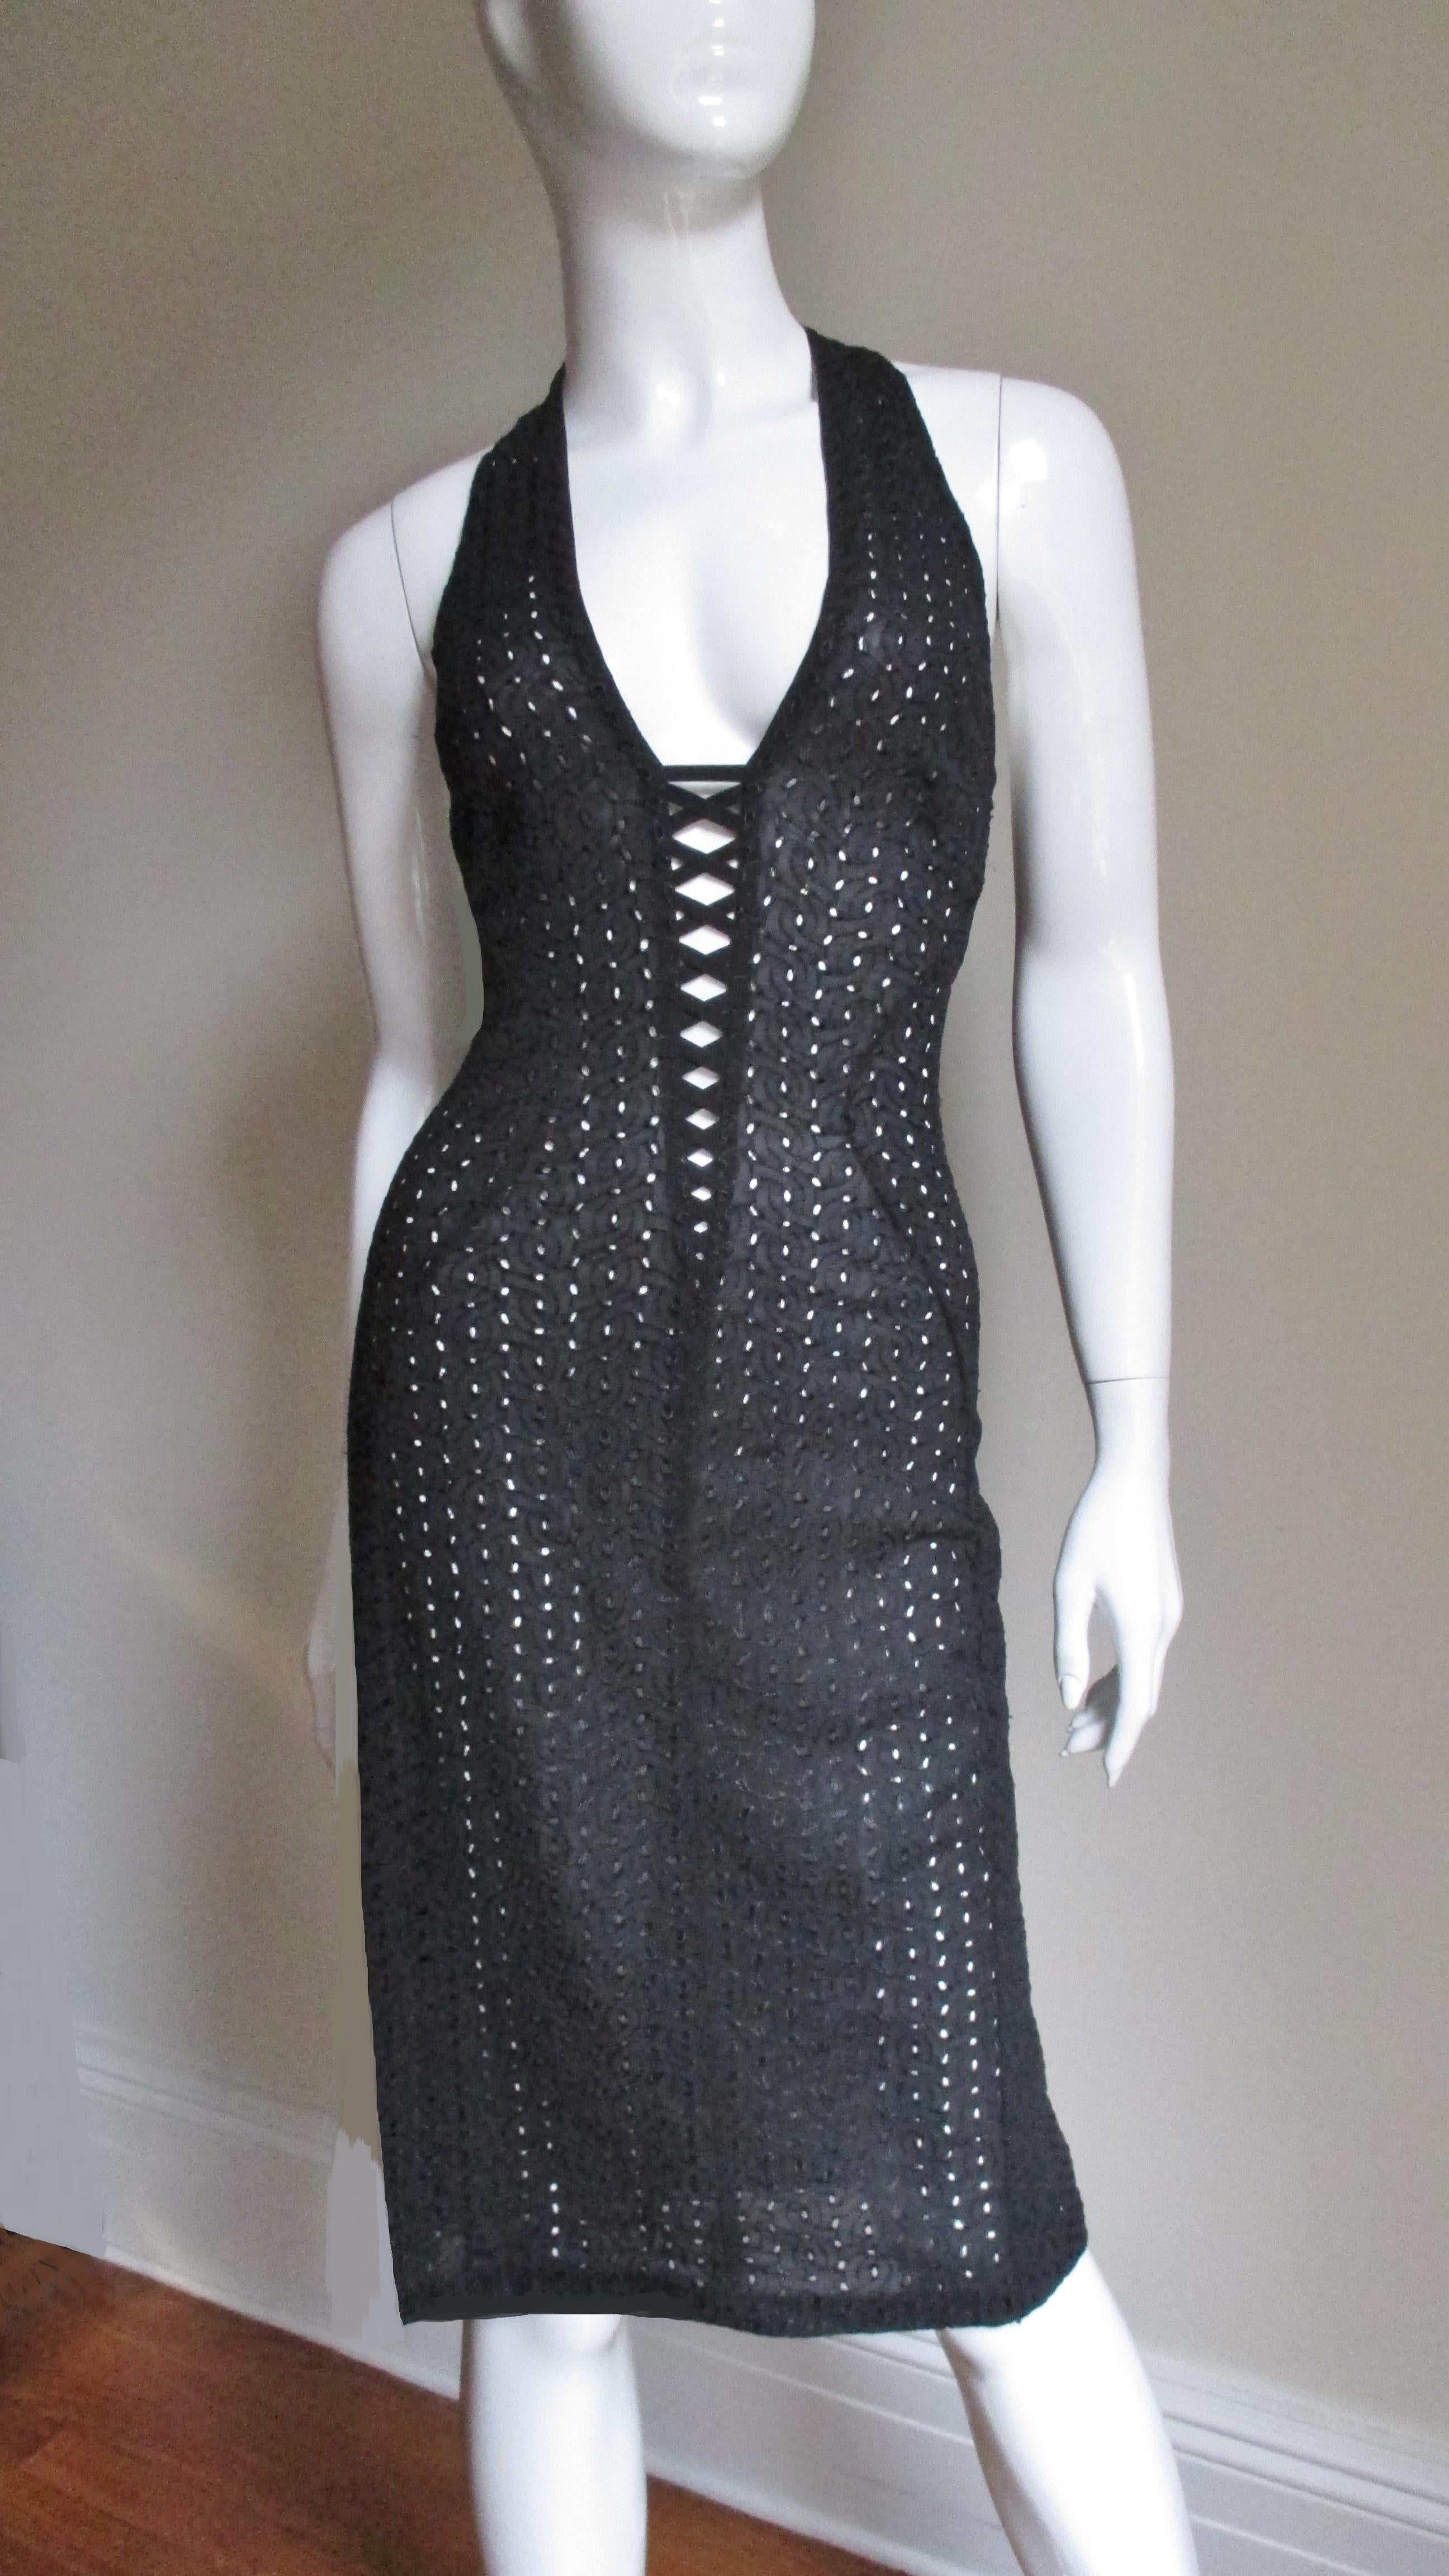 A fabulous bodycon dress in black perforated silk by Gianni Versace Couture.  It has a plunging neckline to the waist with lacing to the lower decolletage and straps crossing at the upper back.  The dress has flattering seaming cutting in at the